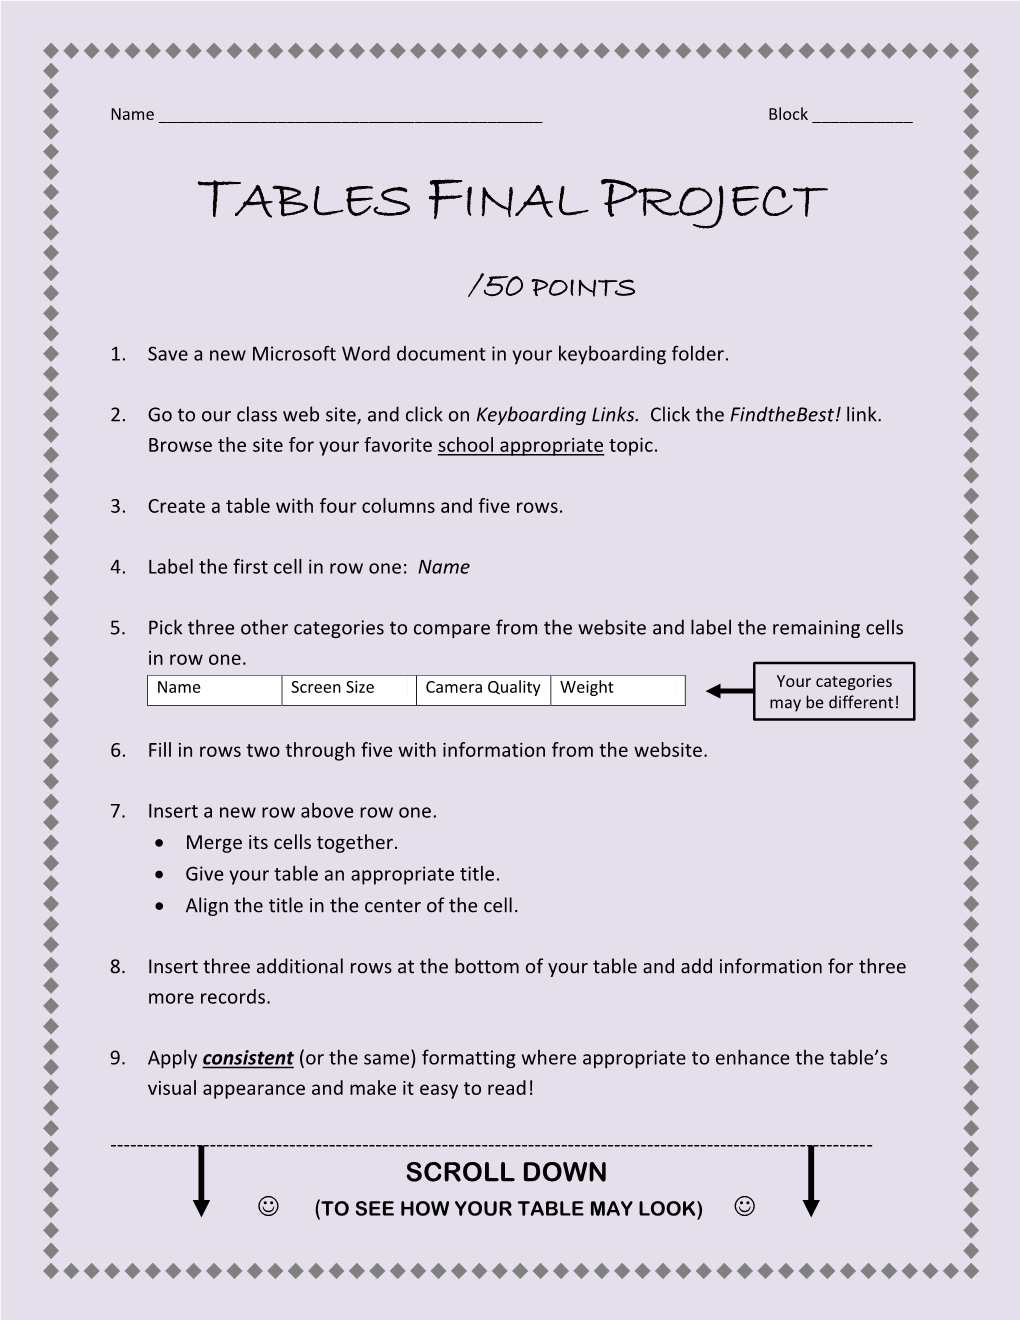 Tables Final Project